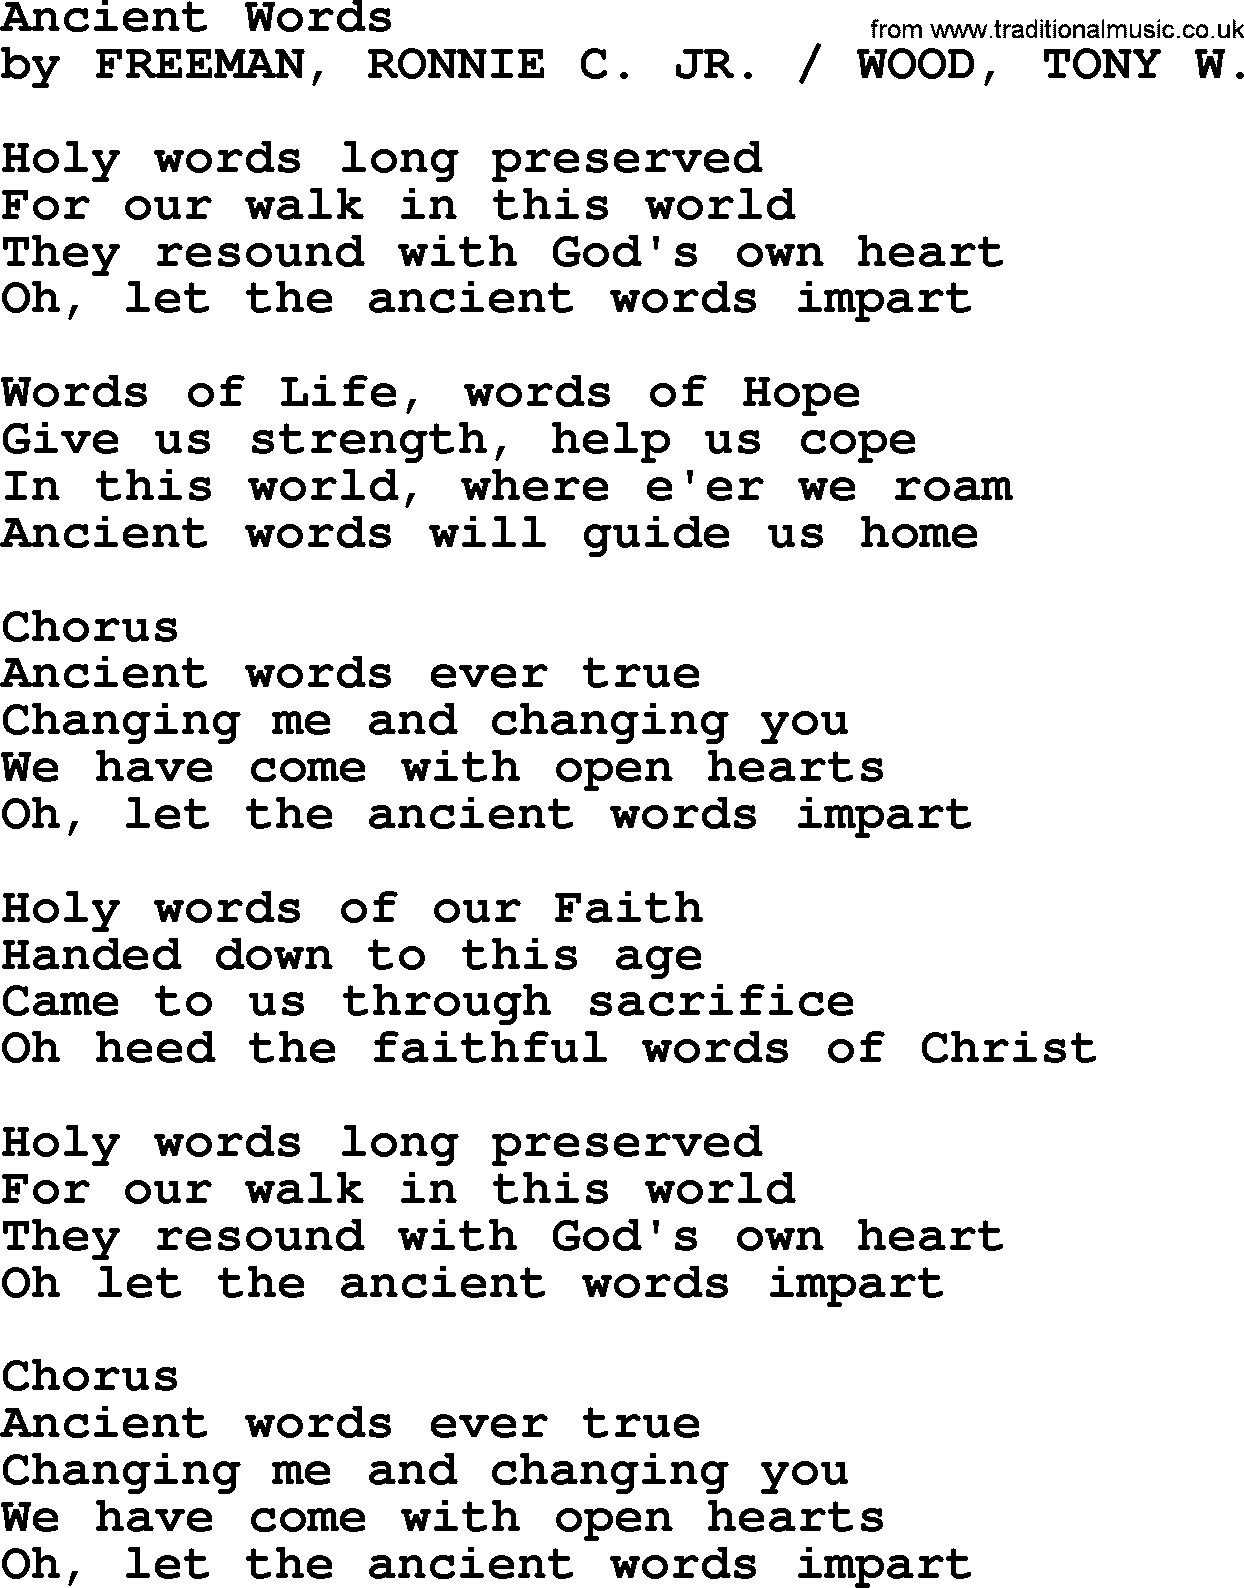 A collection of 500+ most sung Christian church hymns and songs, title: Ancient Words~, lyrics, PPTX and PDF